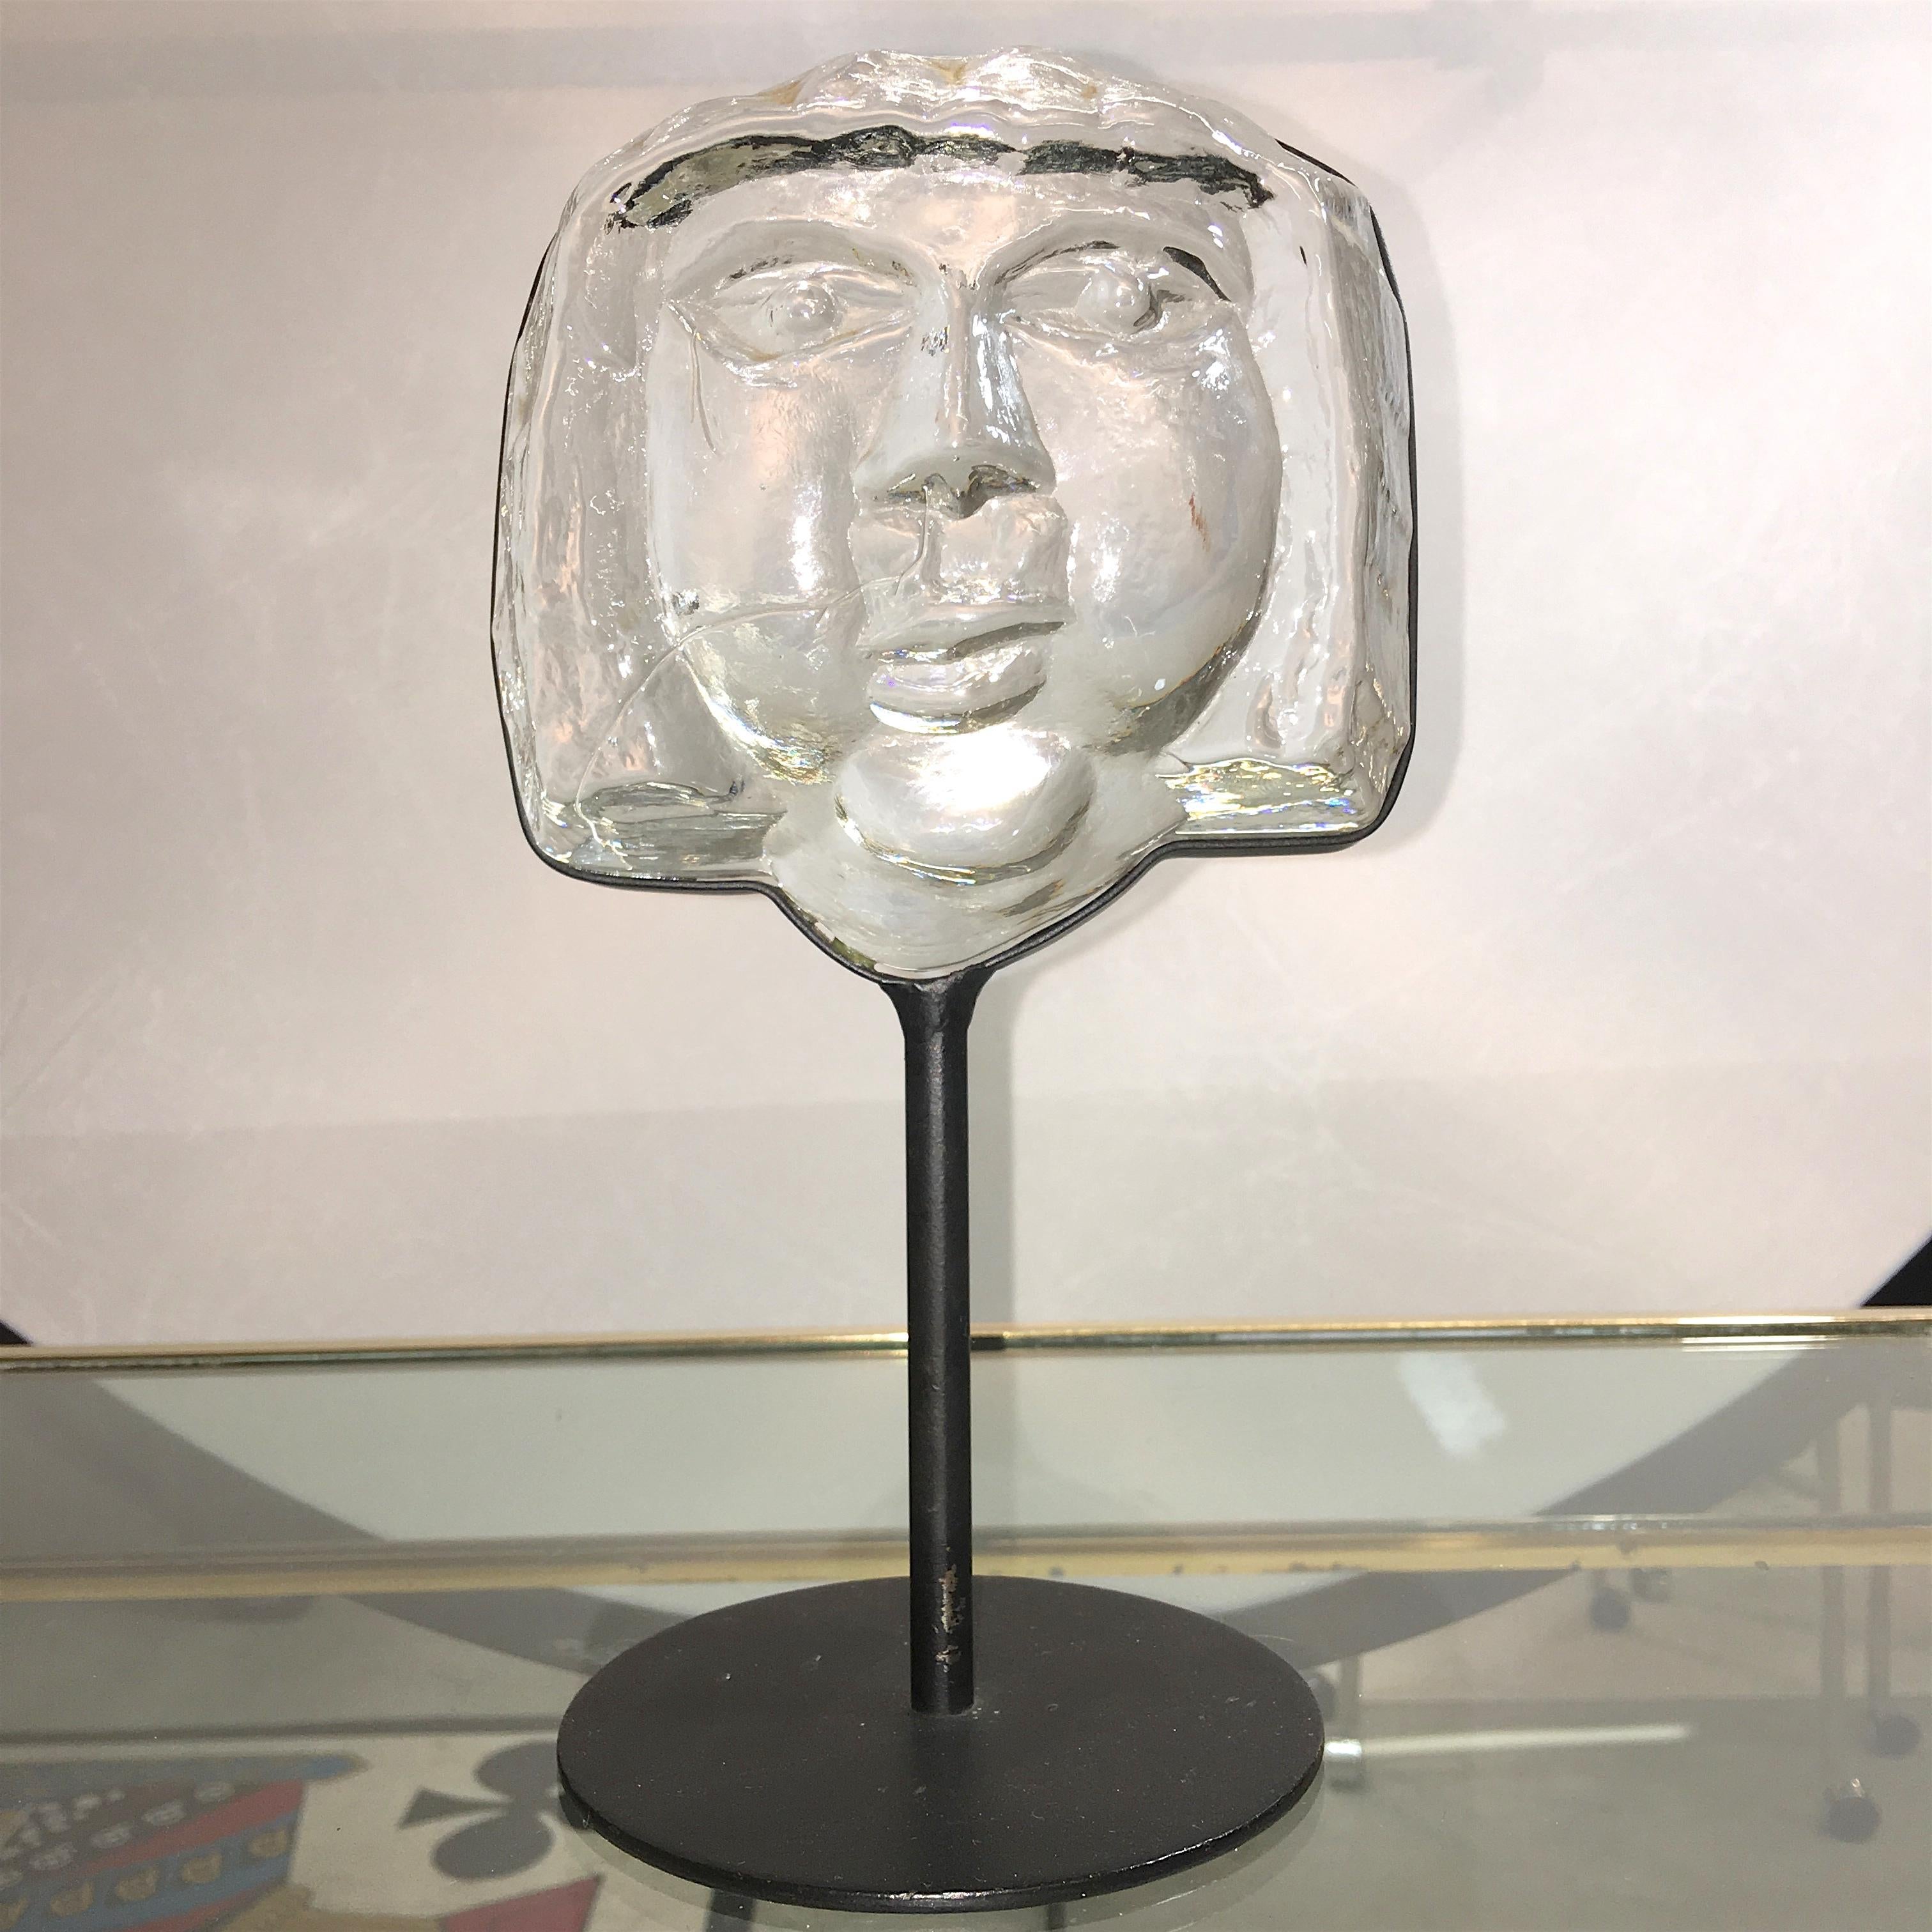 Erik Hoglund for Kosta Boda artglass sculpture, face, or head, mounted on steel base, signed BODA on bottom base, Sweden, 1960s.

Height including base is 10 inches, width 5.5 in., base diameter 4.5 in.

Is it me or does he look a little like